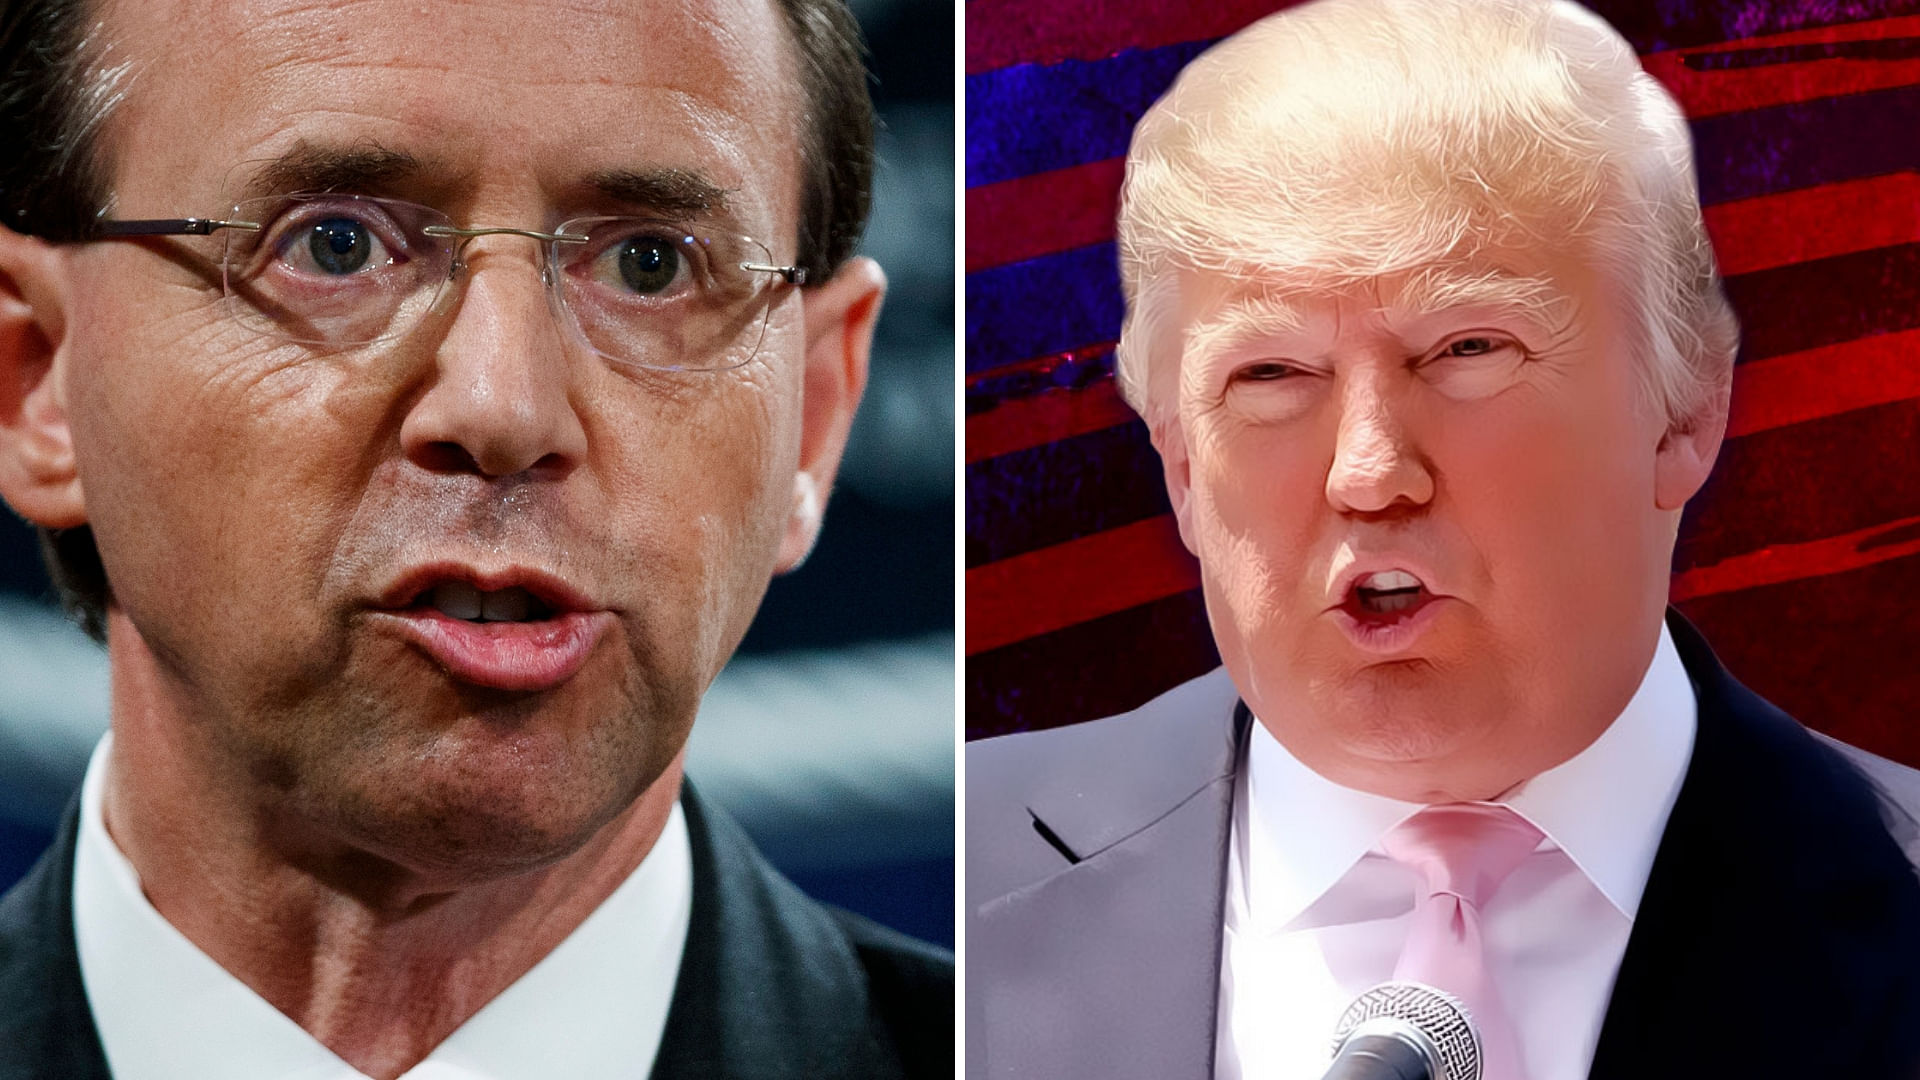 Deputy Attorney General Rod Rosenstein was heading to the White House on Monday expecting to be fired by President Donald Trump following reports that he had made critical comments of Trump.